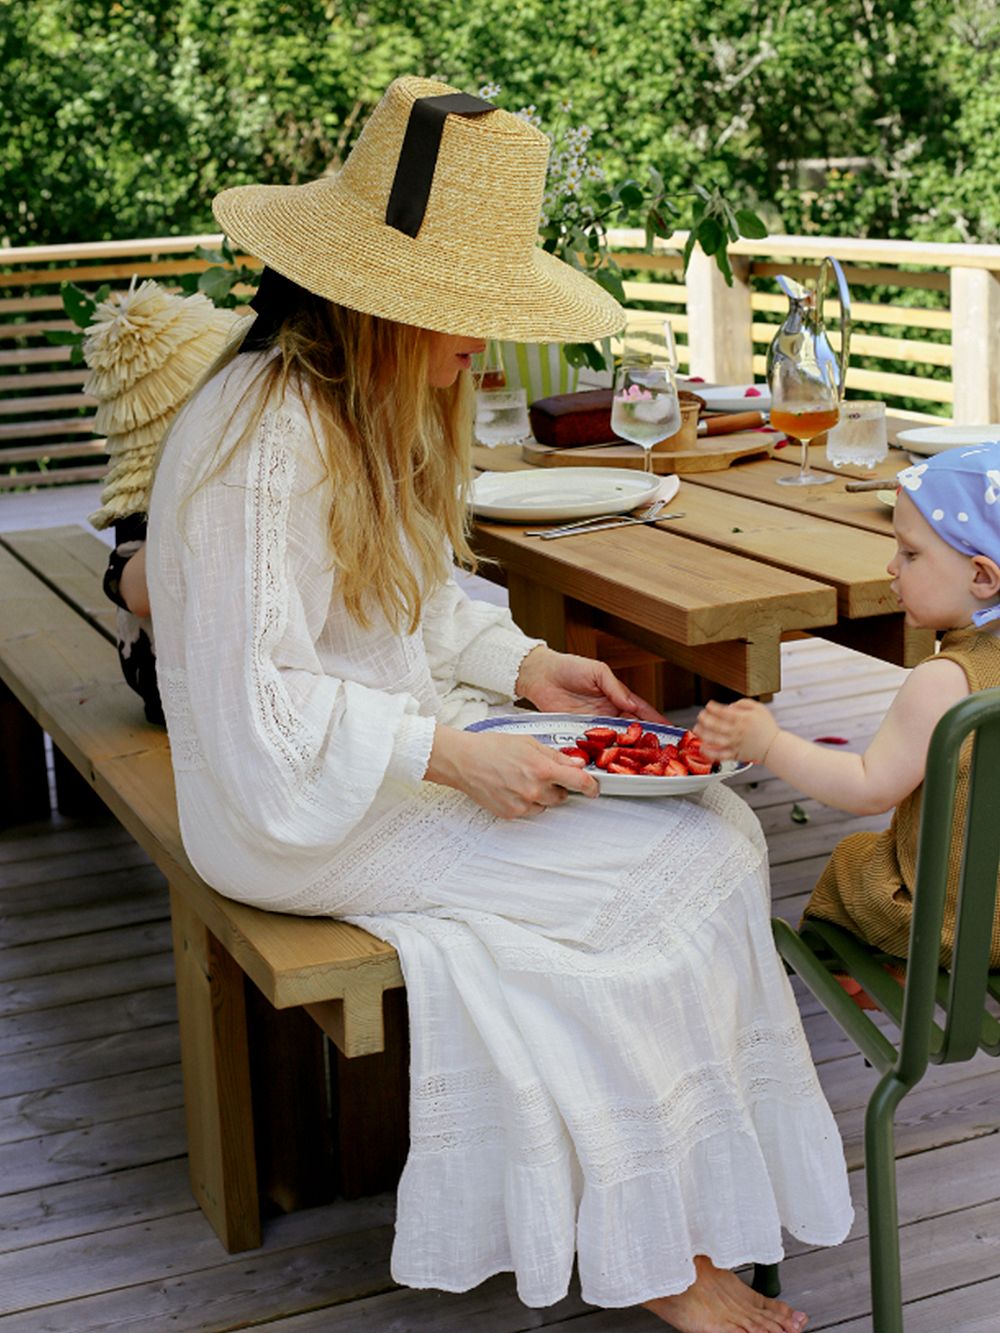 An image of Kirsikka Simberg and their kids enjoying strawberries at the patio.